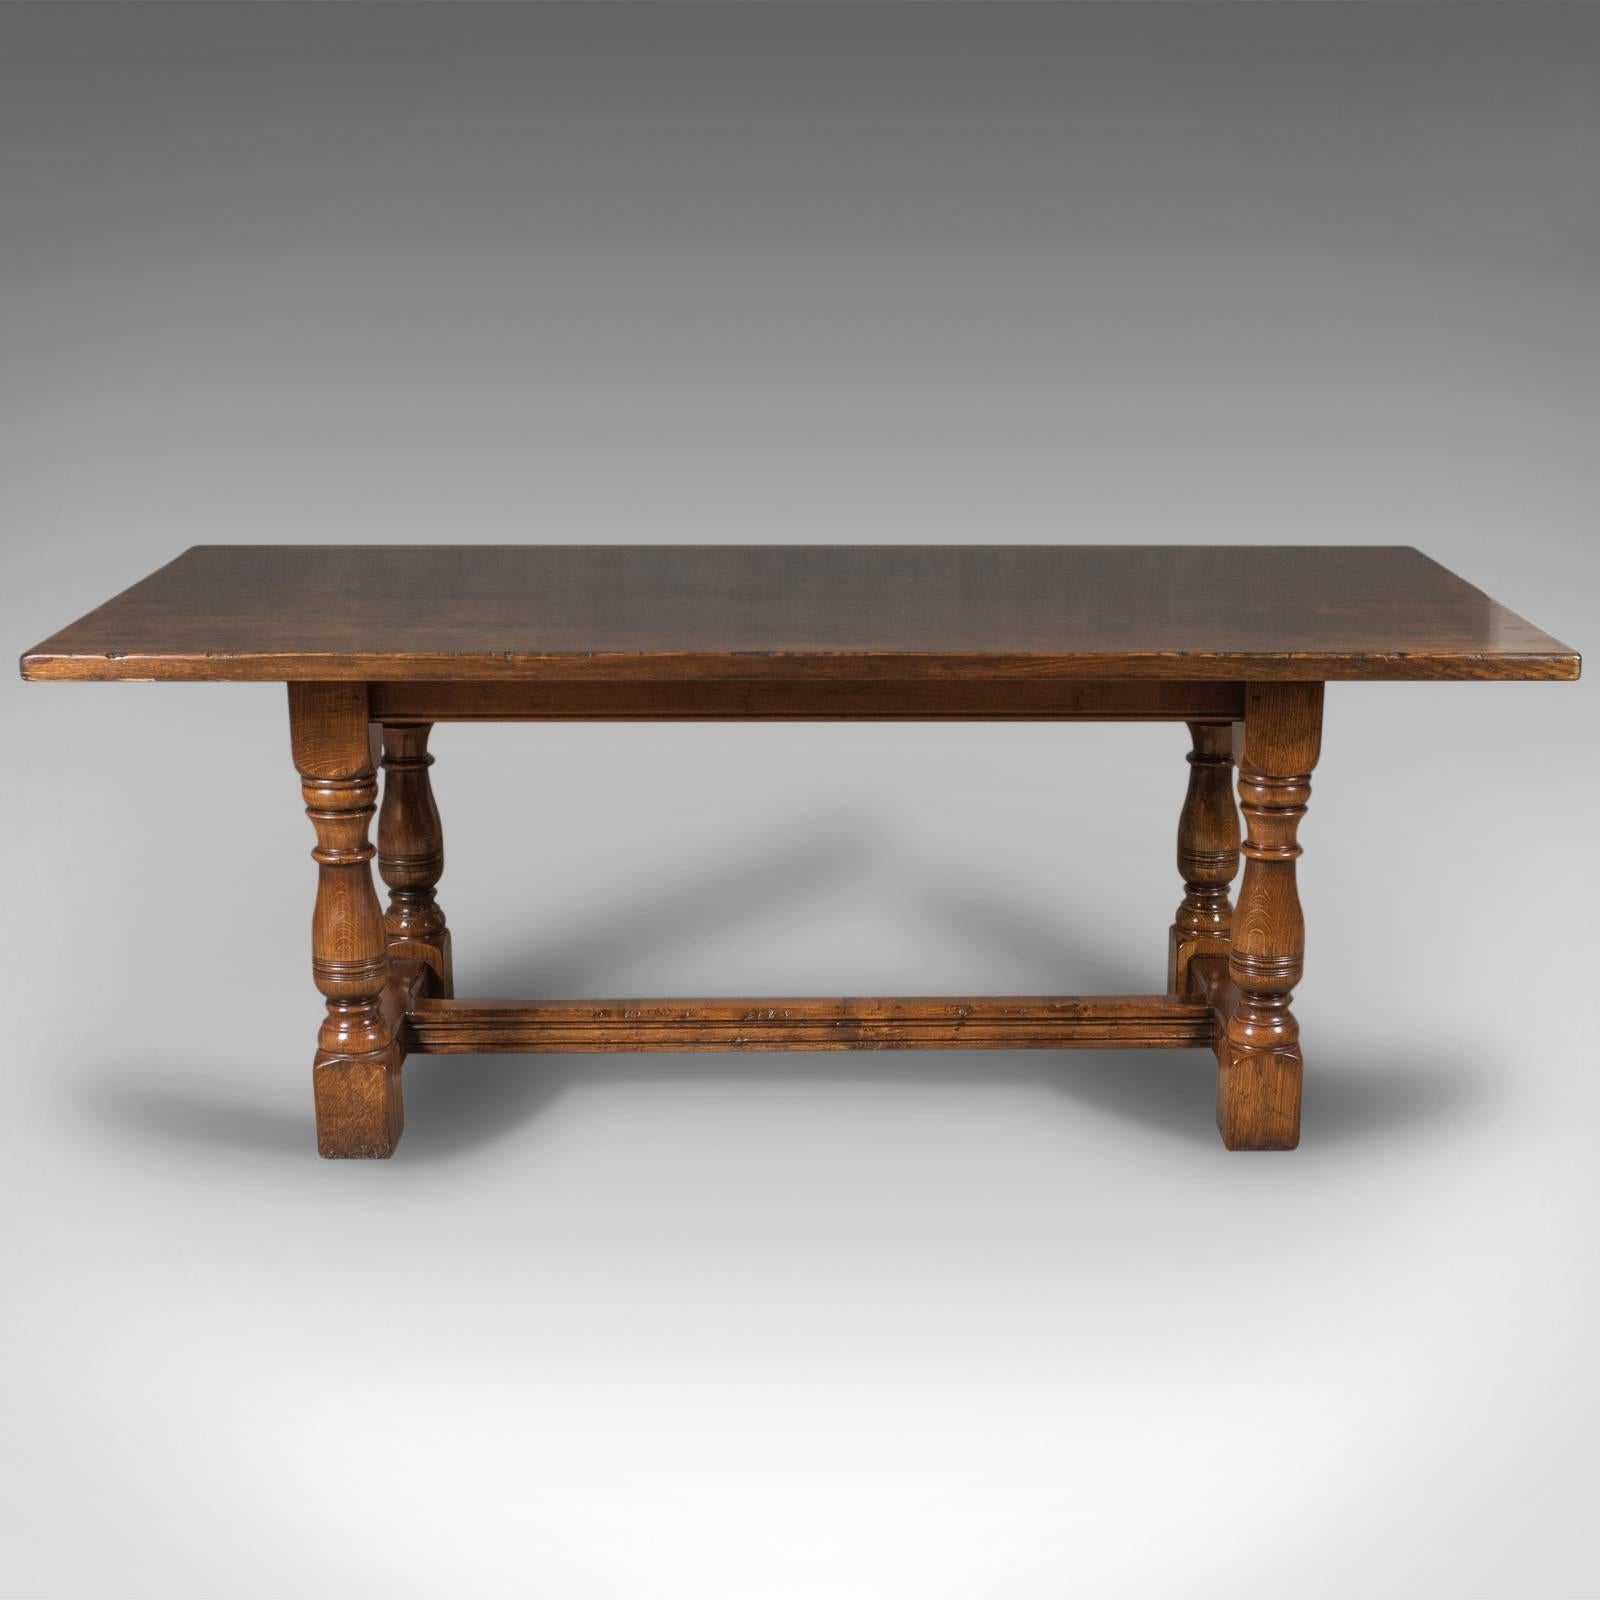 This is a superior quality, six-eight-seat oak refectory table in the 17th century taste made in the late 20th century.

Substantial English oak with good grain detail 
Planked top in a very robust 3.25cm (1.25'') thick stock
Aged beneath a